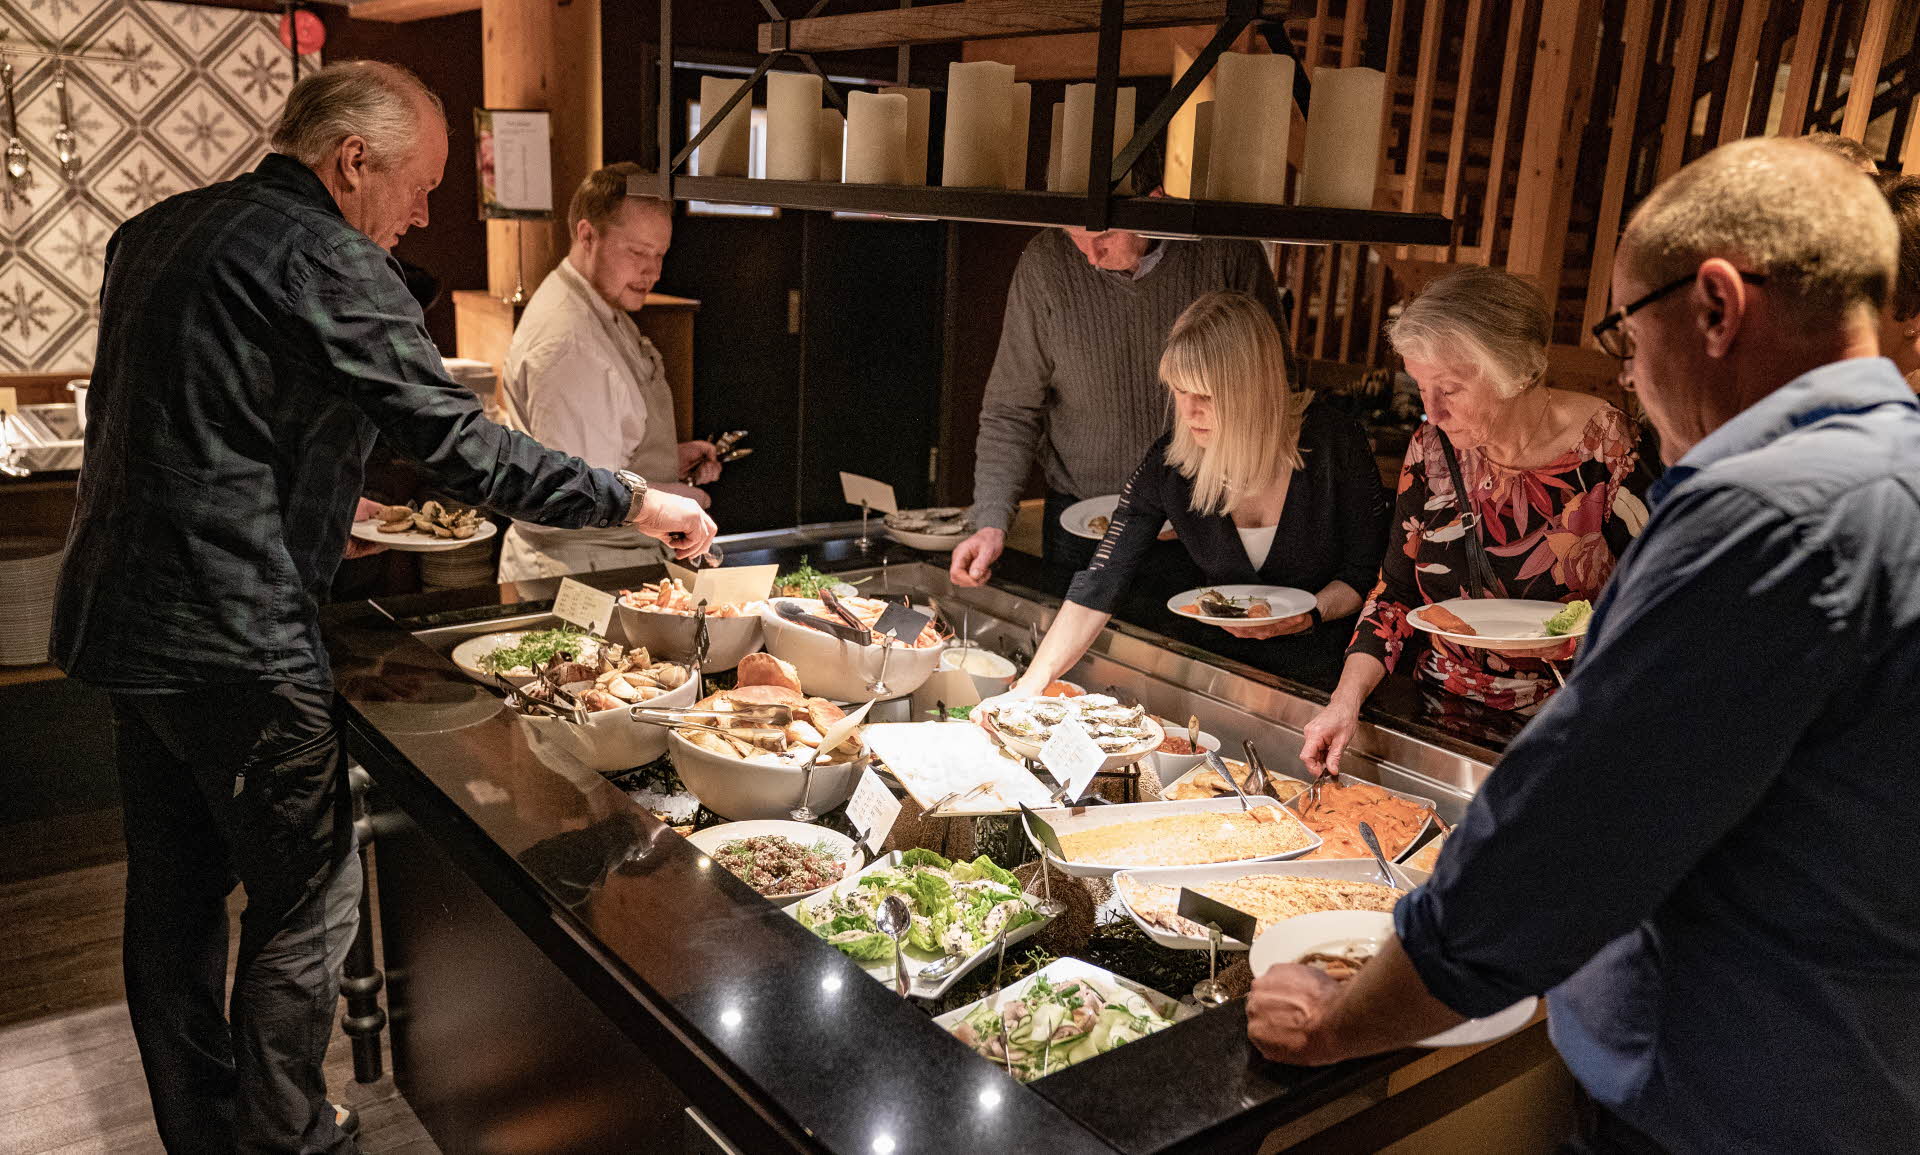 Hotel guests serving themselves from a buffet at Fretheim Hotel in Flåm